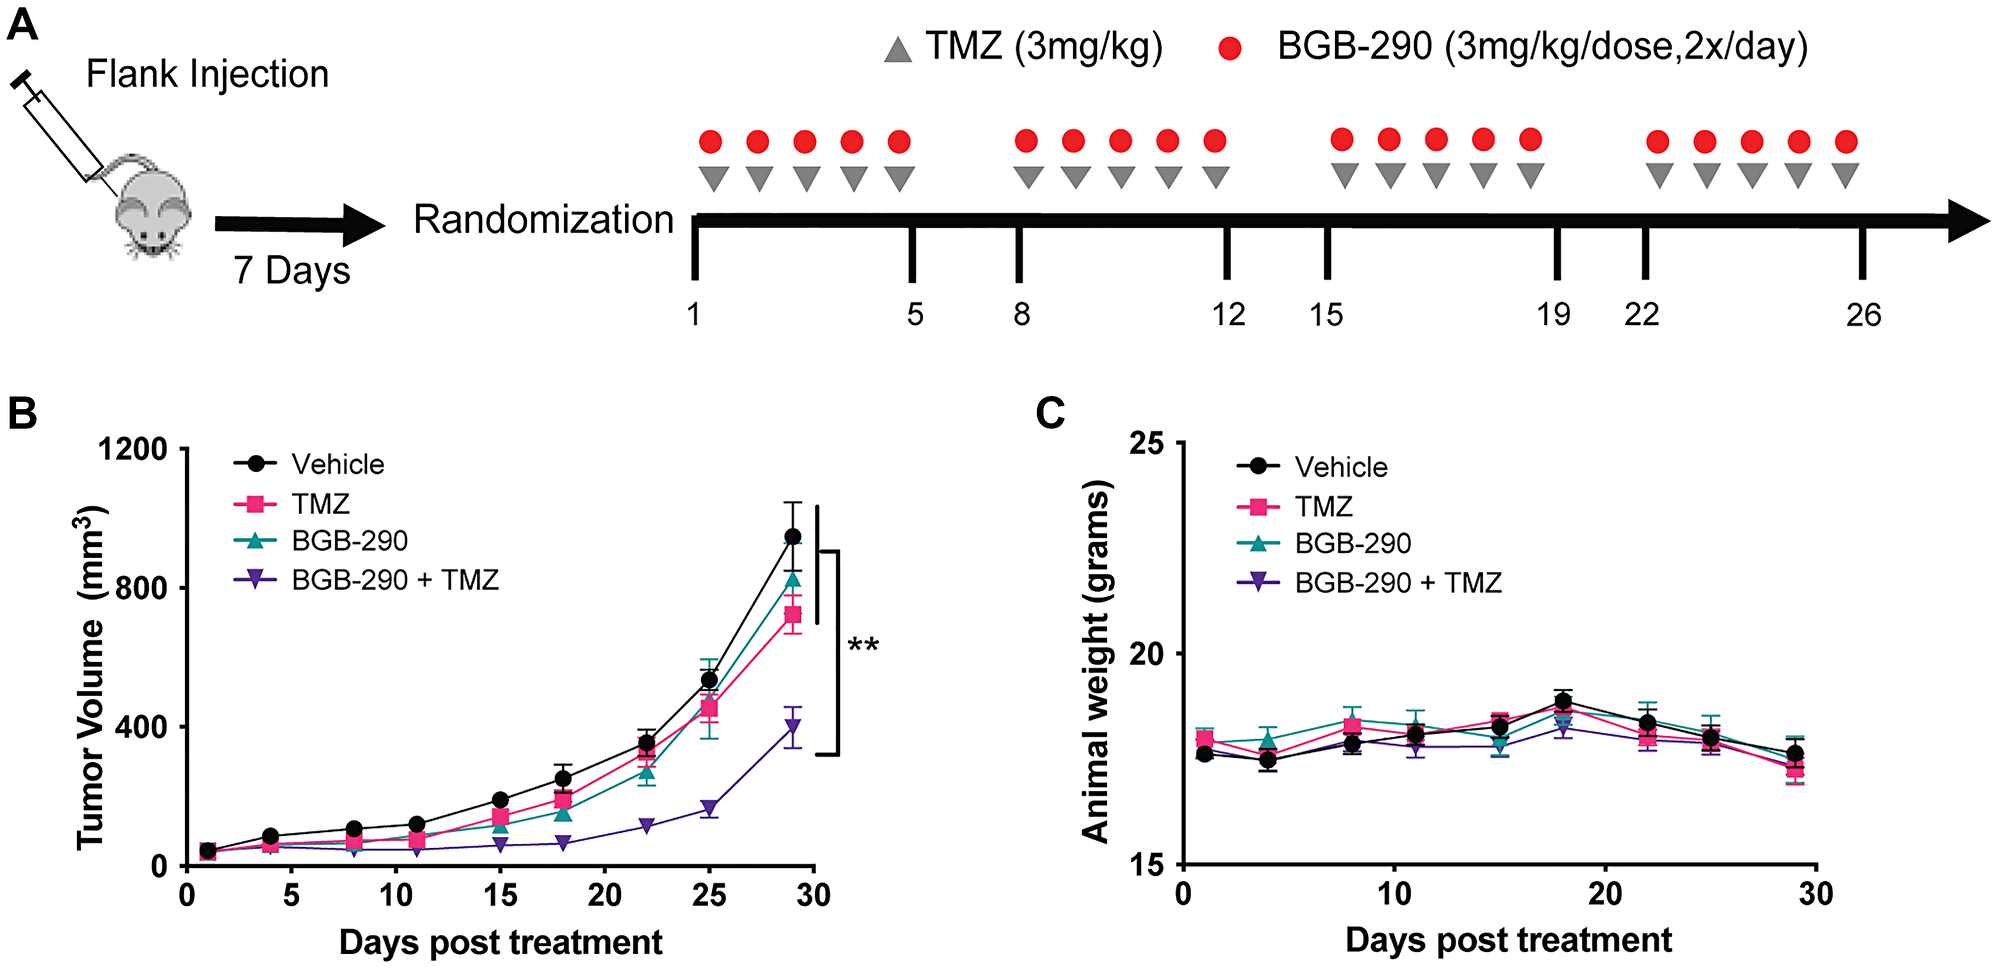 Sdhb deficiency confers sensitivity to combined PARP-inhibitor and low-dose TMZ in vivo.